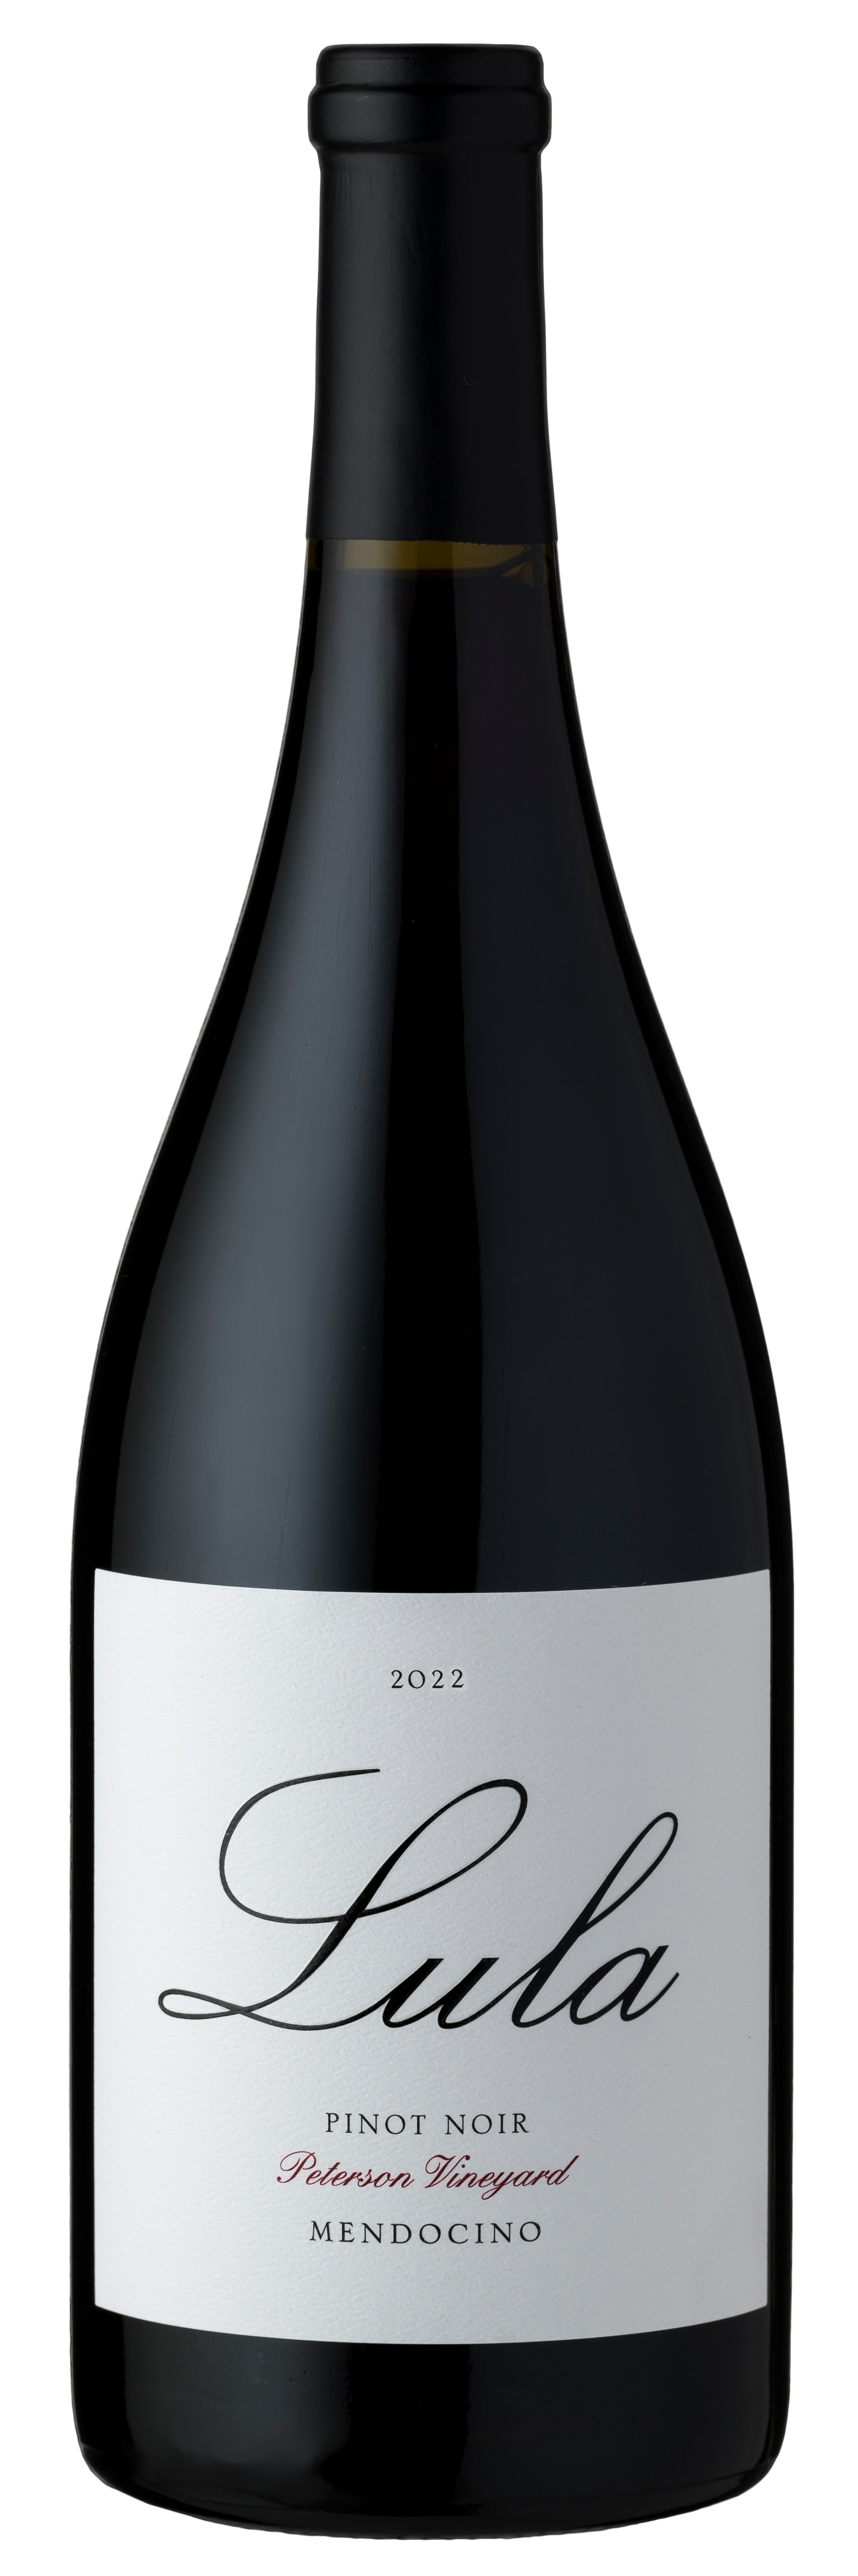 Product Image for 2022 Peterson Pinot Noir